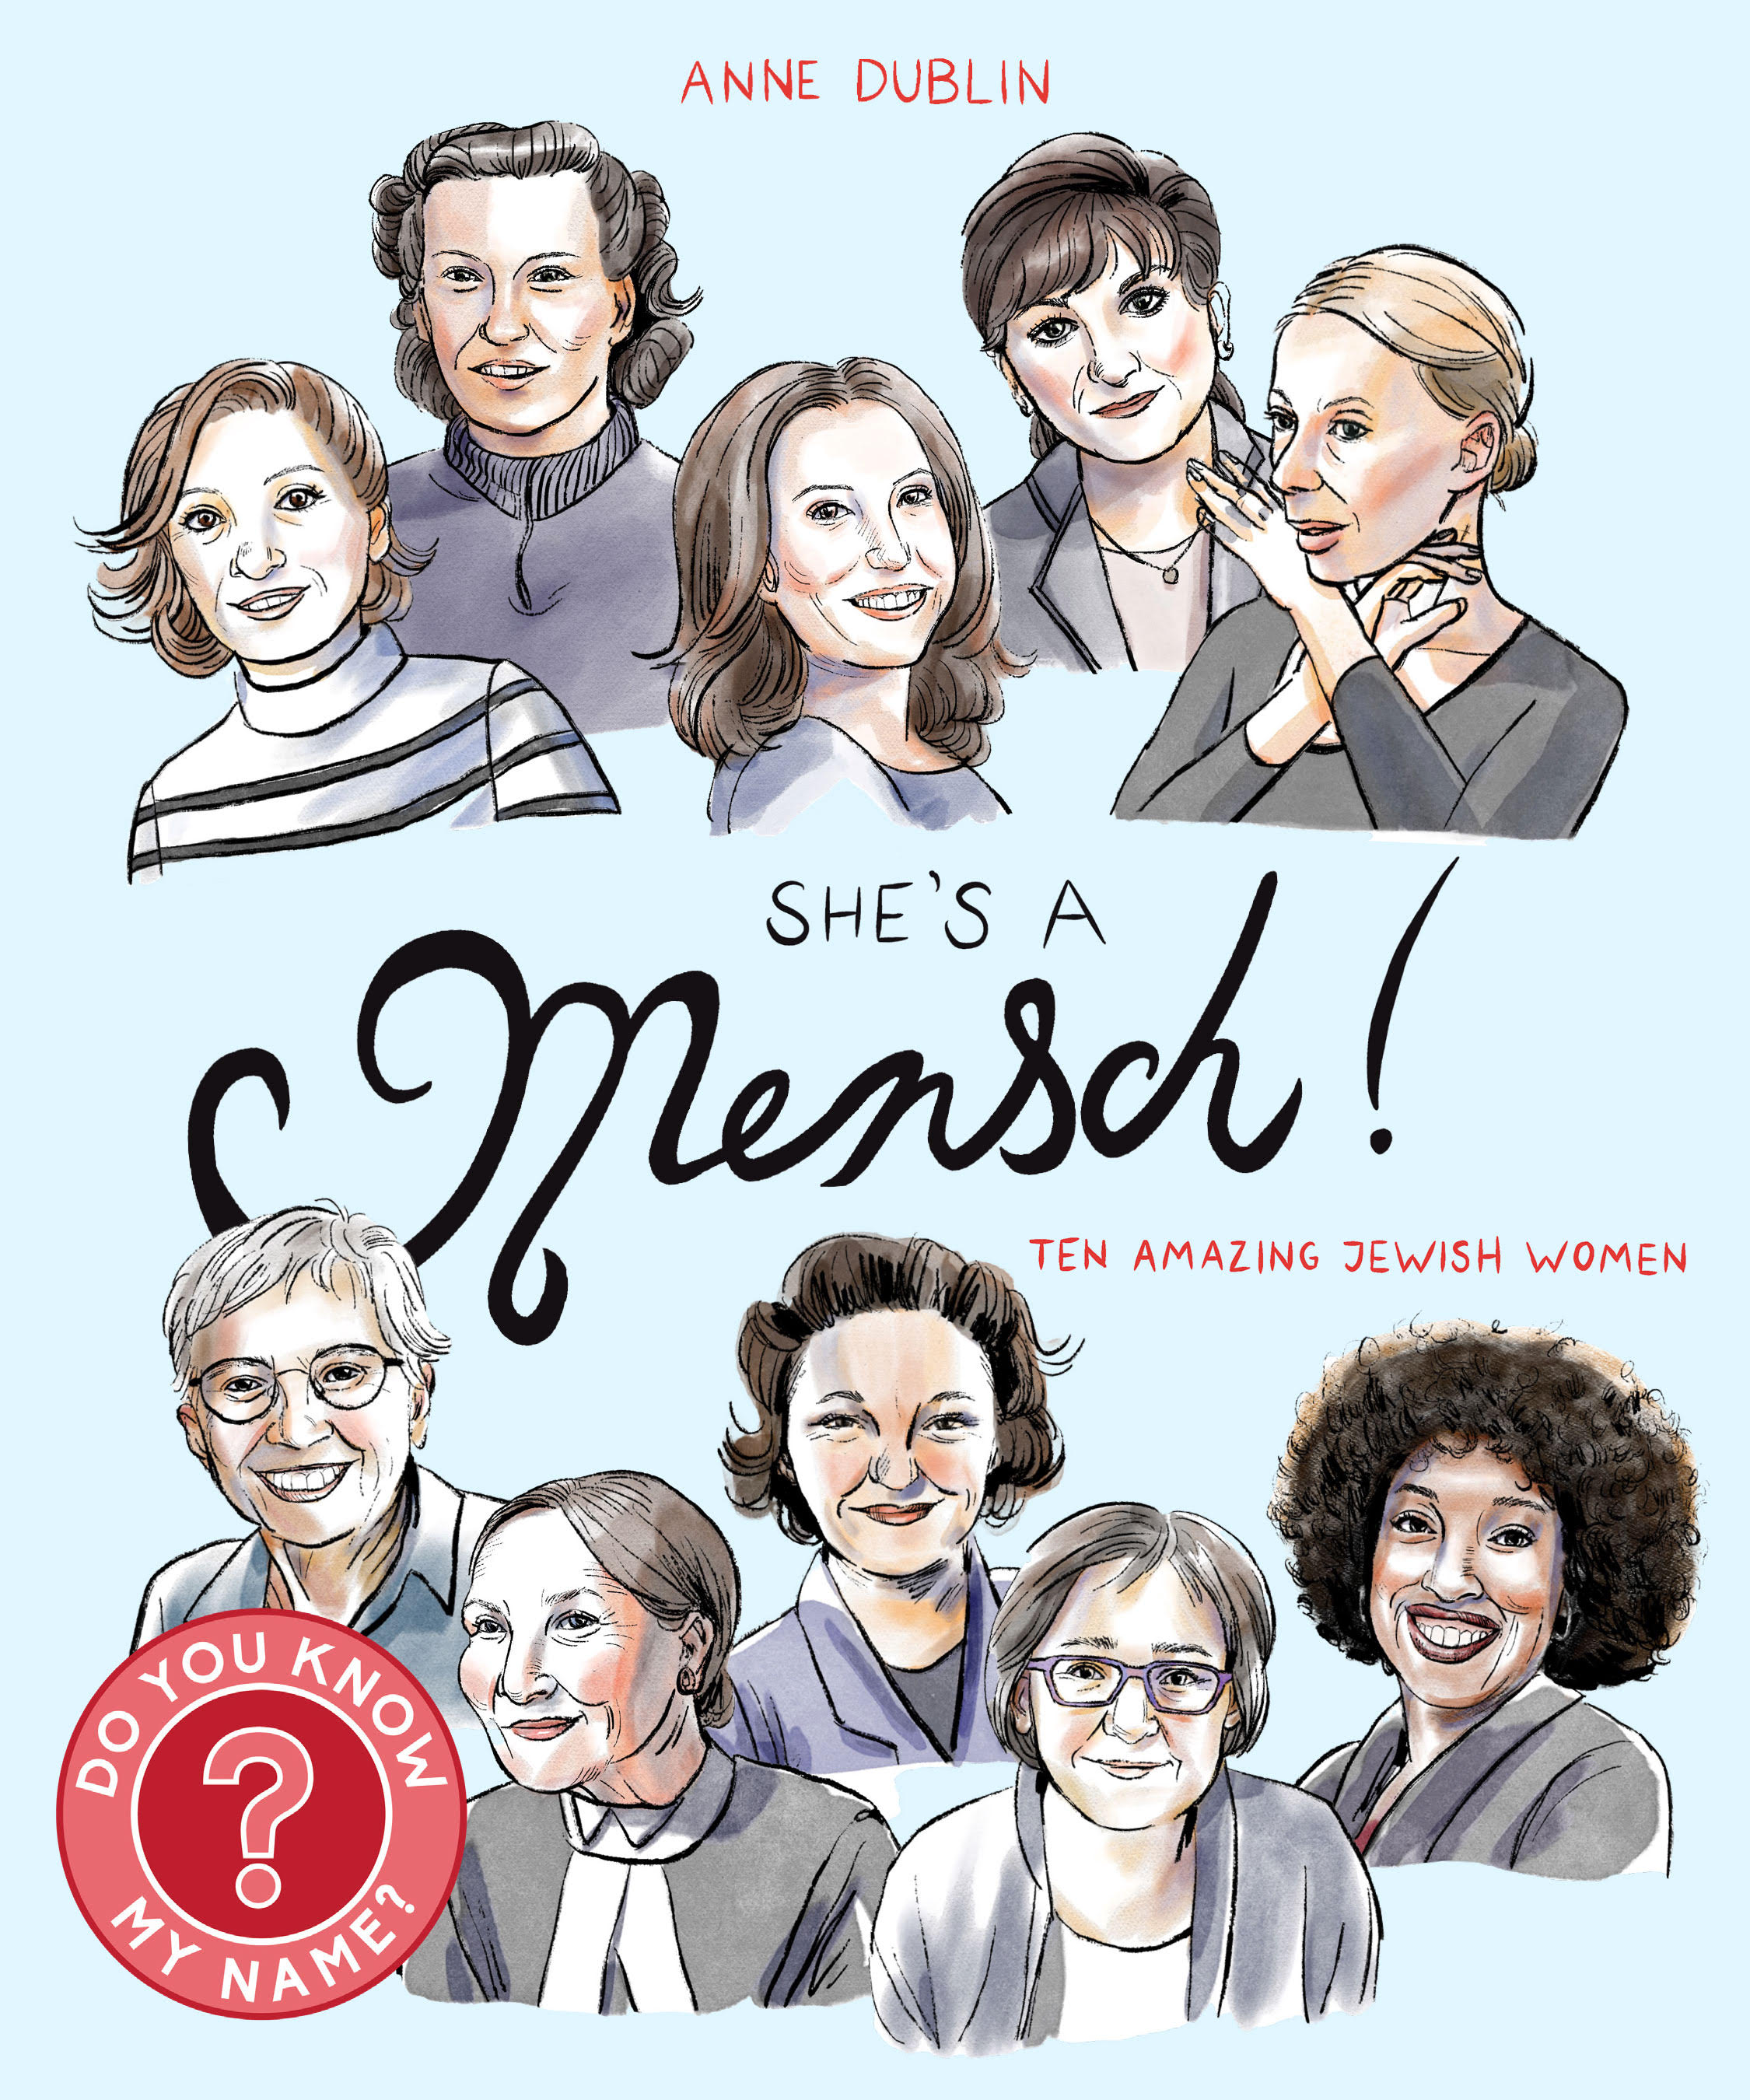 Title: "She's a Mensch: Ten Amazing Jewish Women" with illustrations of the women. Part of the series "Do you know my name?"